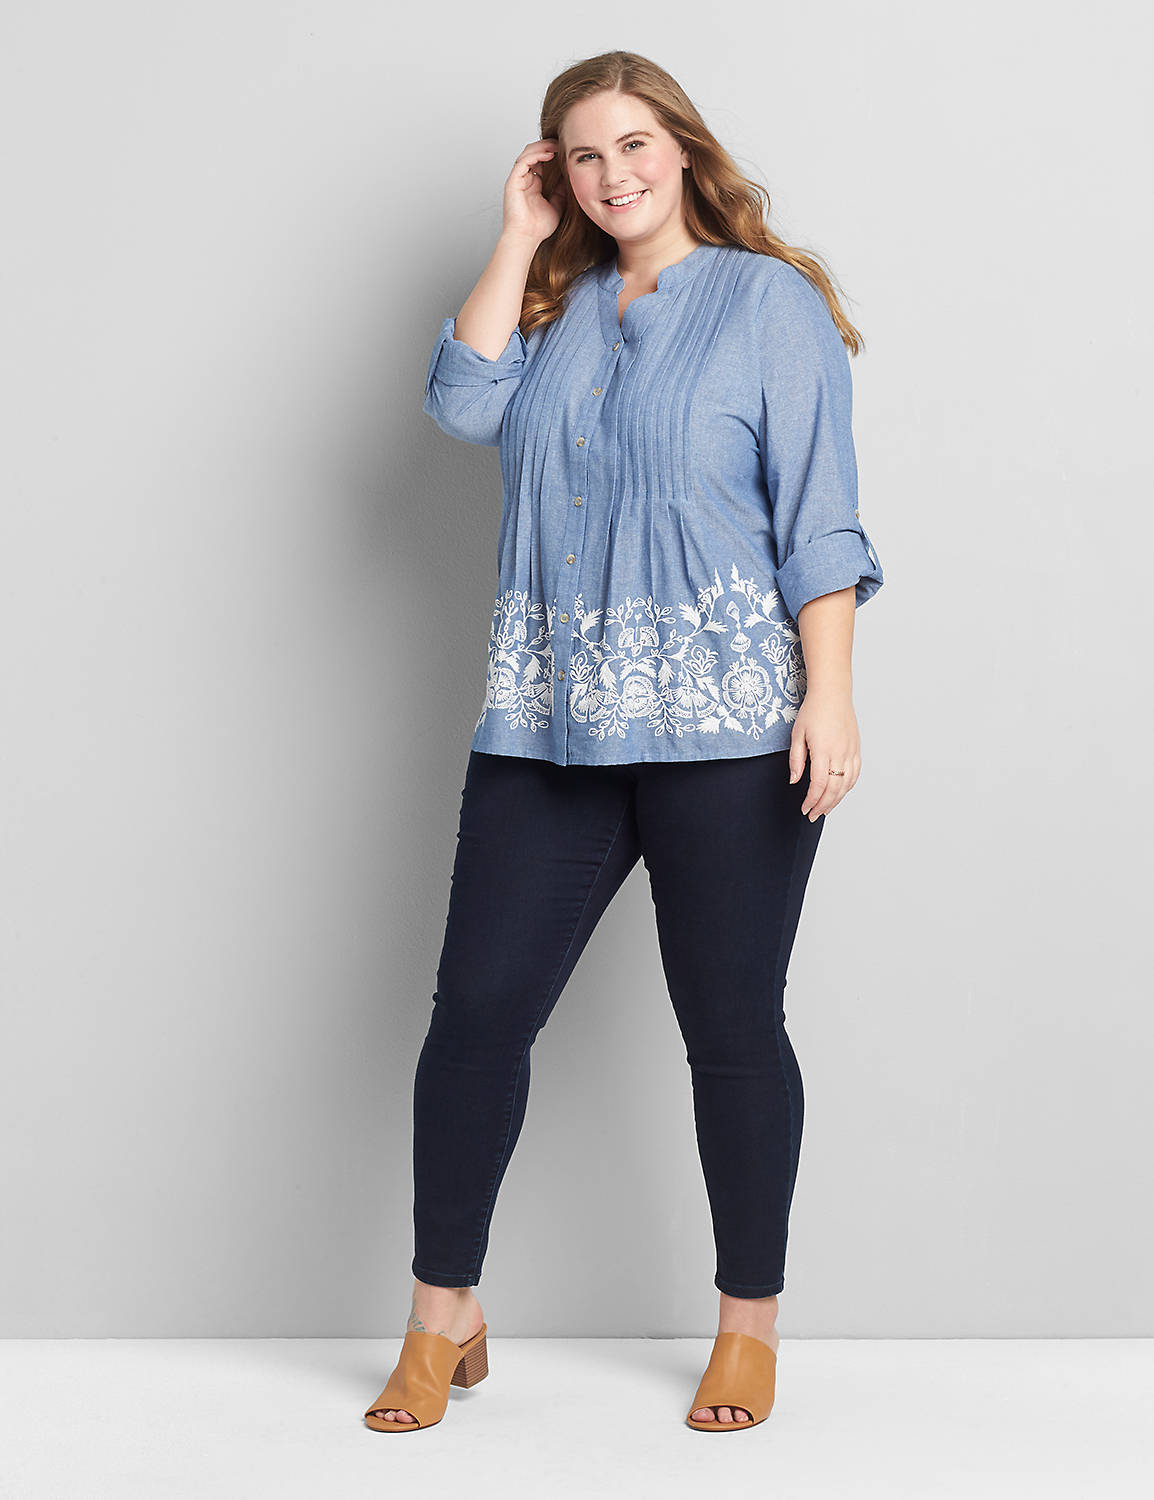 Long Sleeve Split Neck Button Front Embroidery Detail Blouse 1119390:Chambray:26/28 Product Image 3